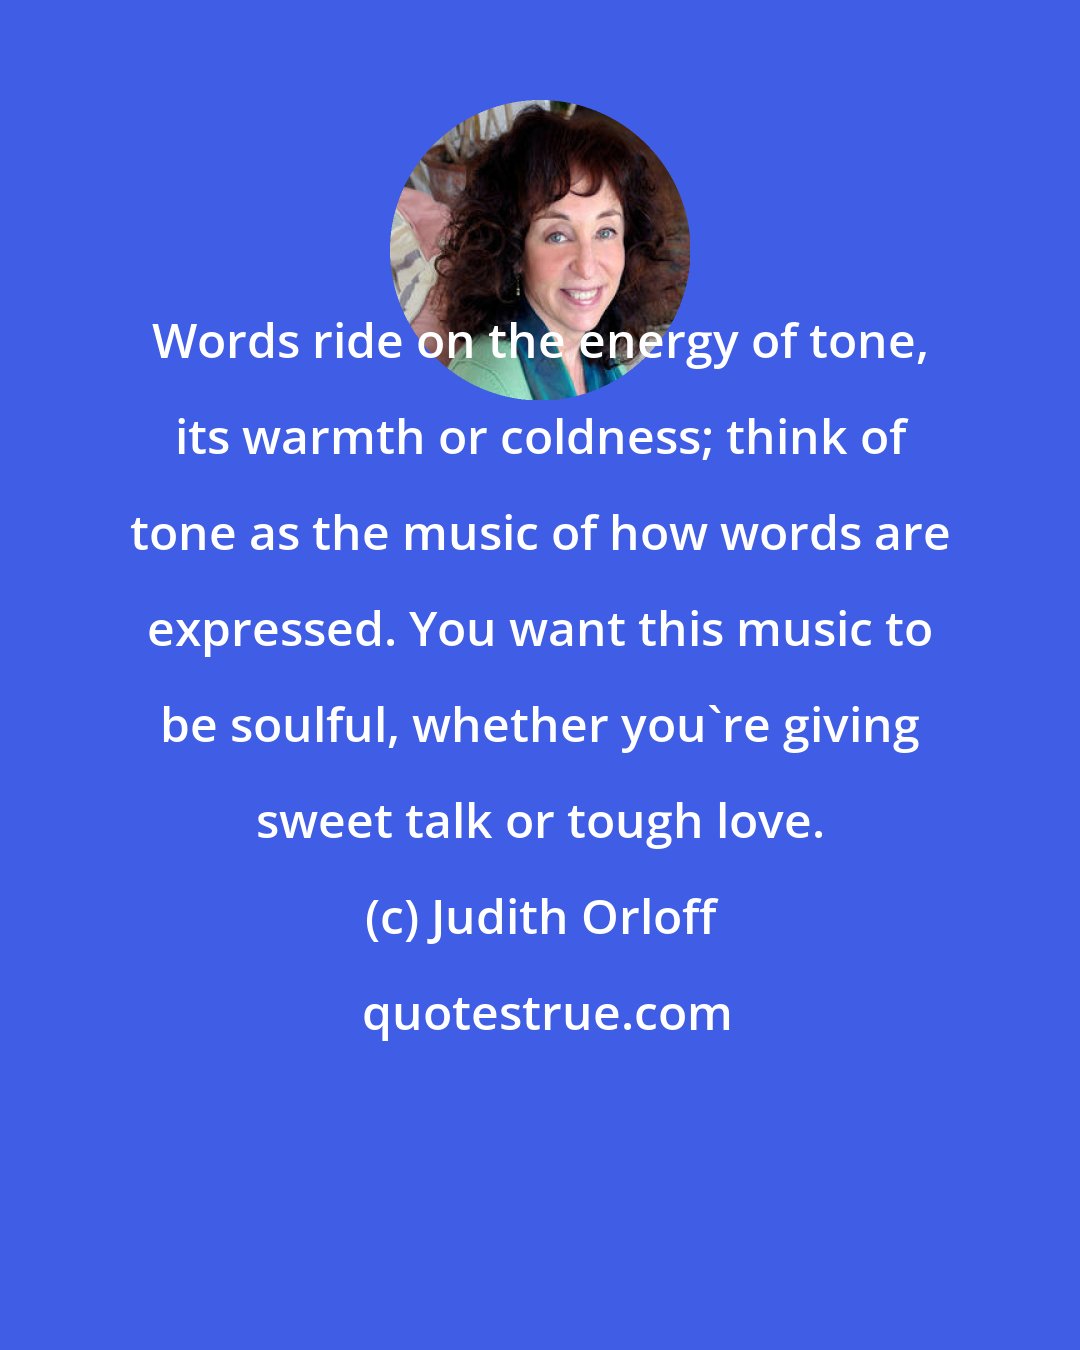 Judith Orloff: Words ride on the energy of tone, its warmth or coldness; think of tone as the music of how words are expressed. You want this music to be soulful, whether you're giving sweet talk or tough love.